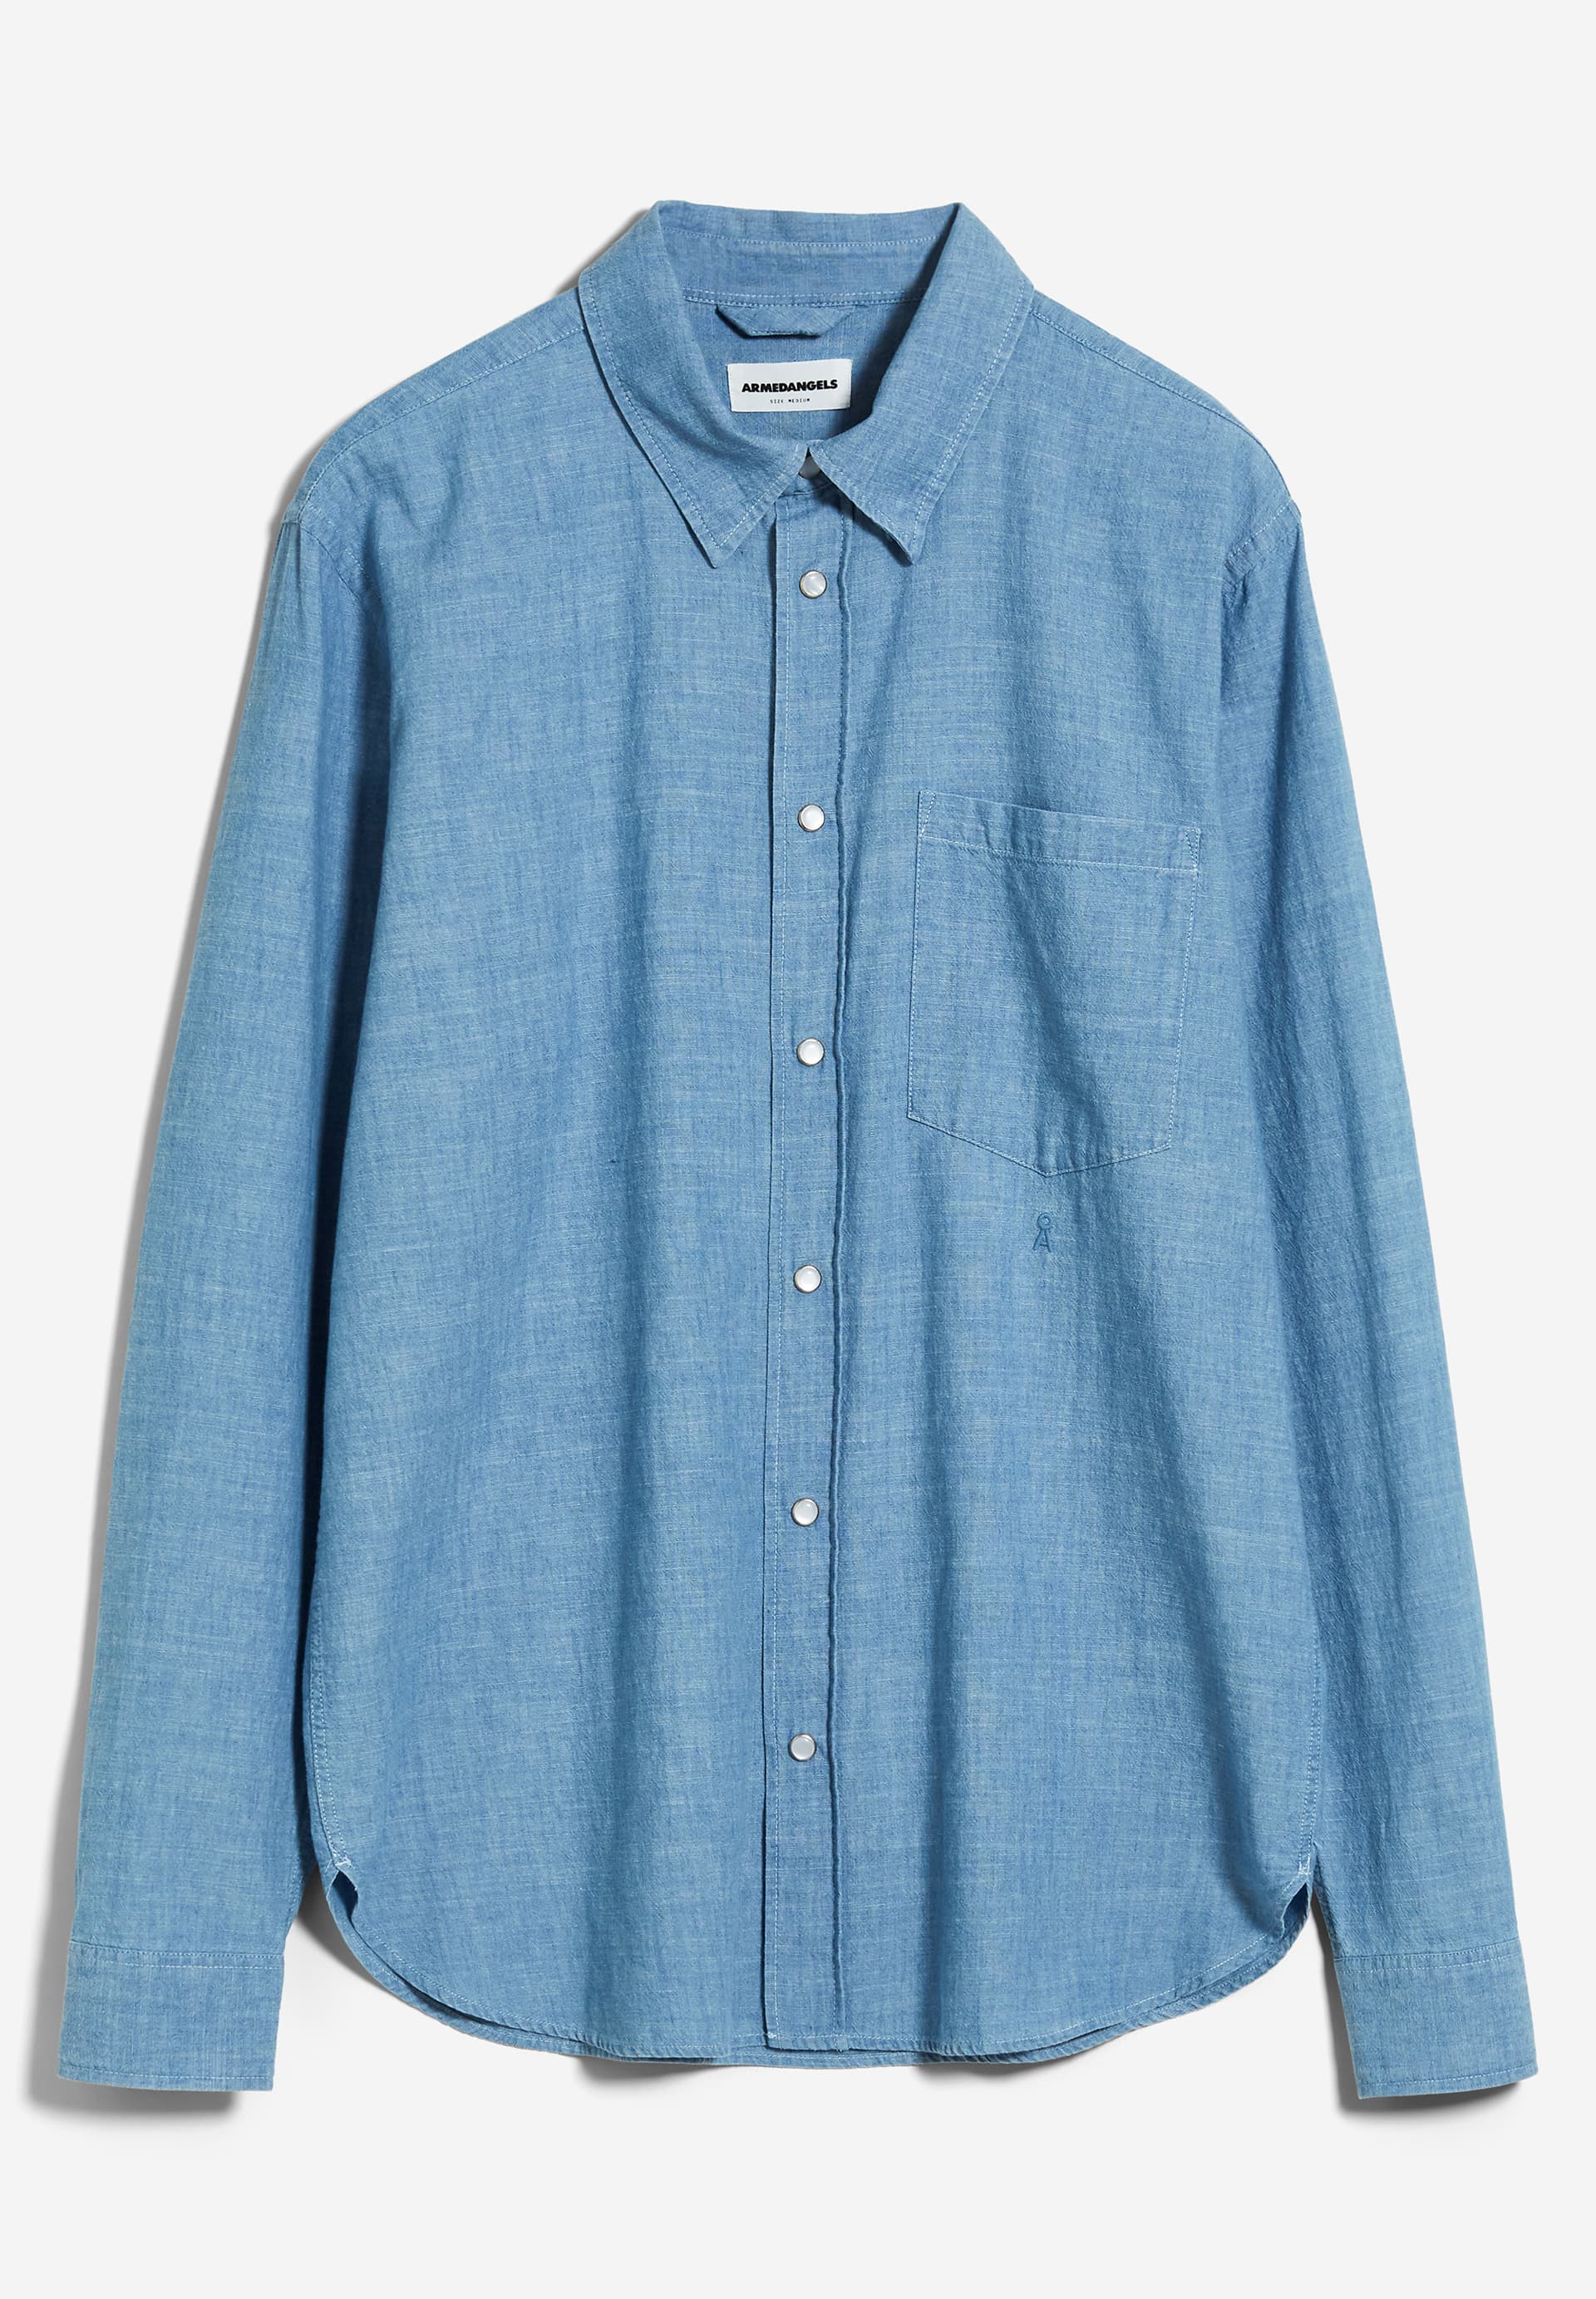 VAASO Shirt Relaxed Fit made of Organic Cotton